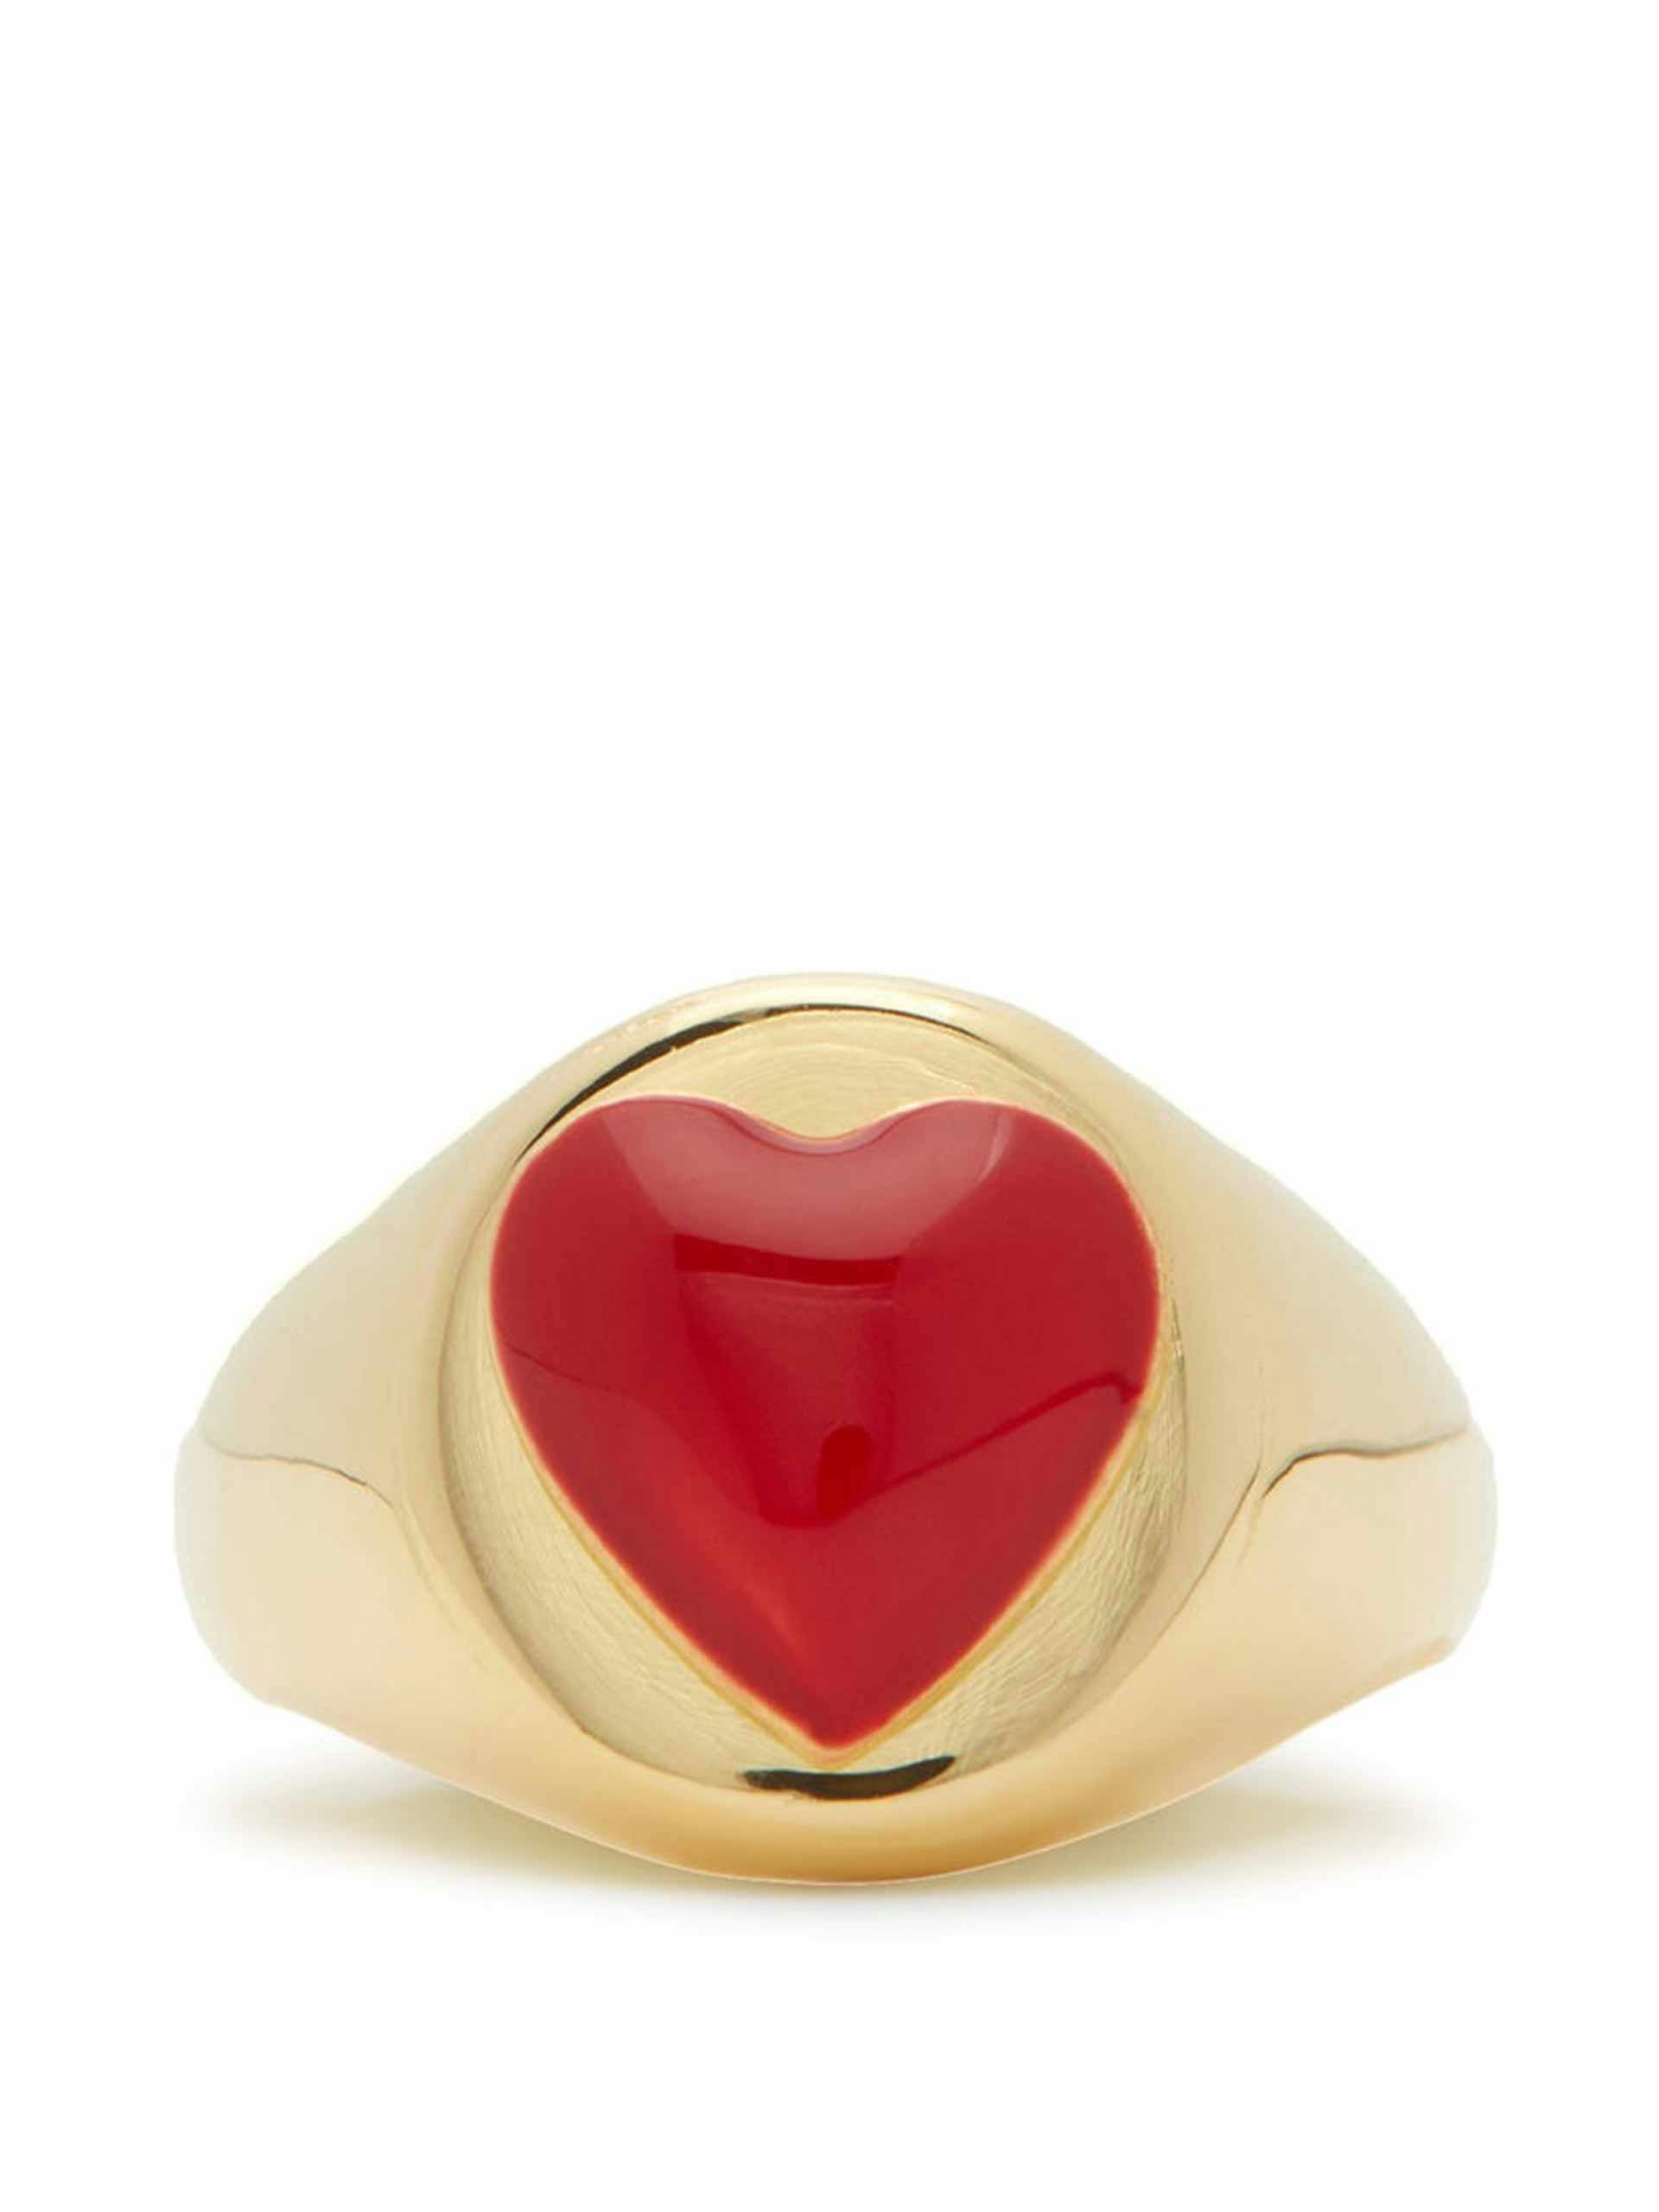 Heart enamel and gold signet ring